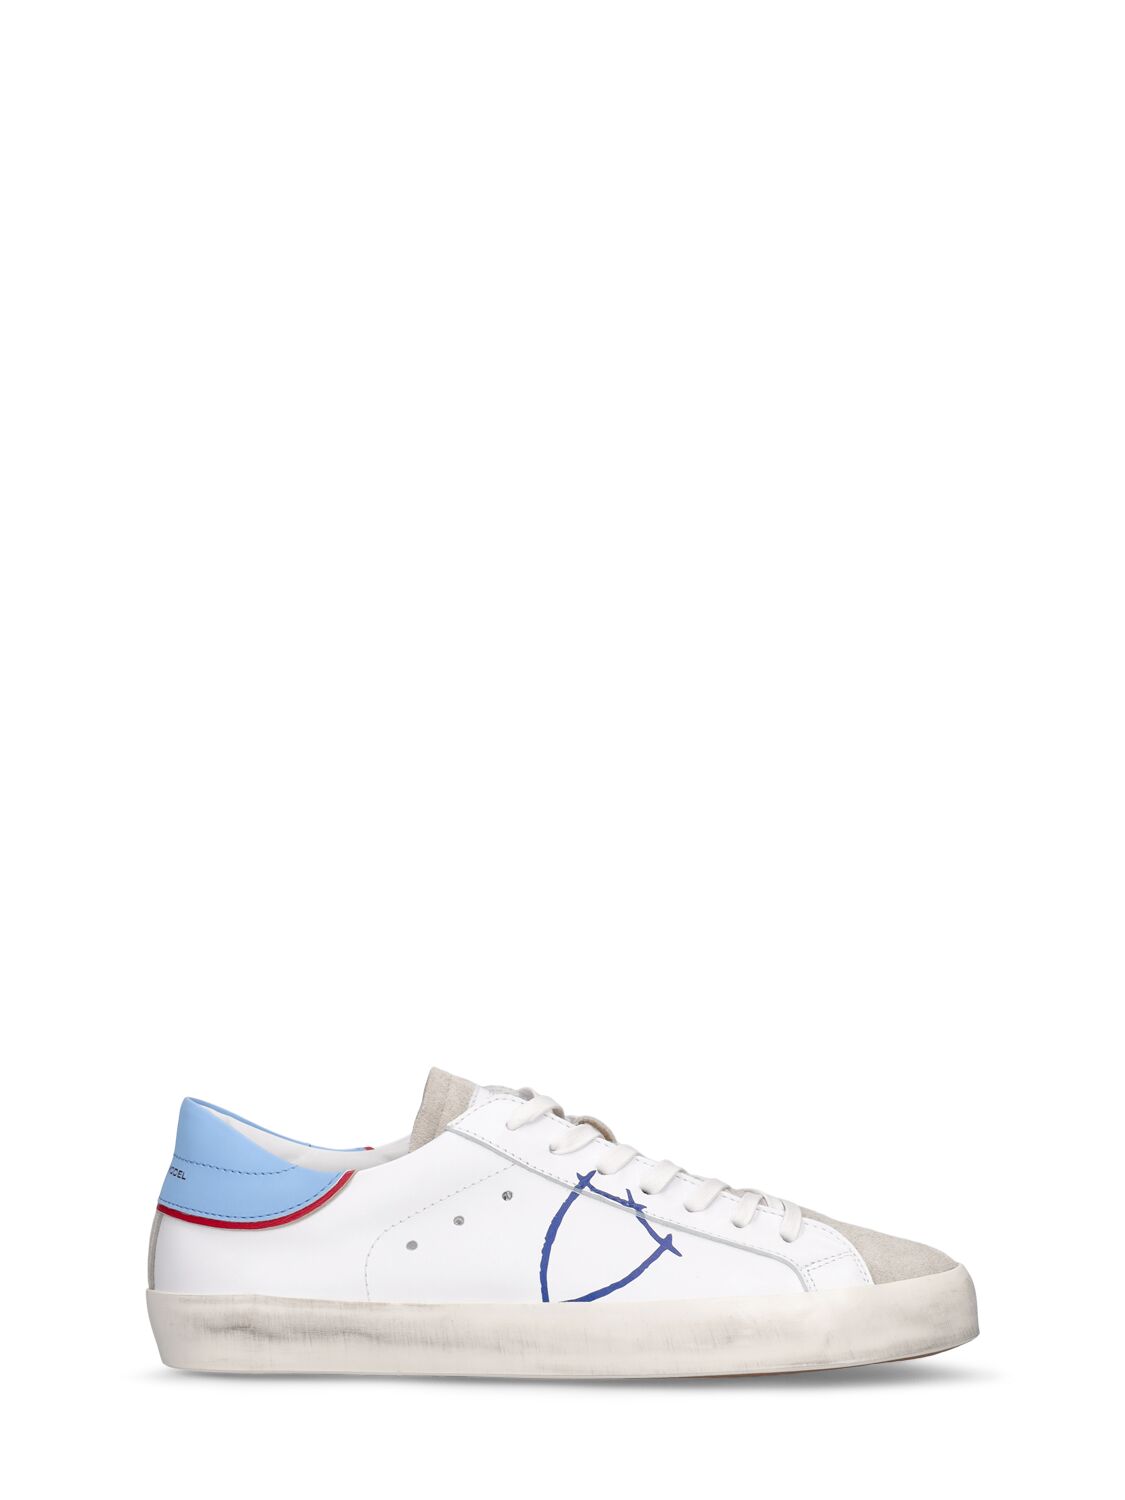 Philippe Model Kids' Paris Leather Lace-up Sneakers In White,light Blue